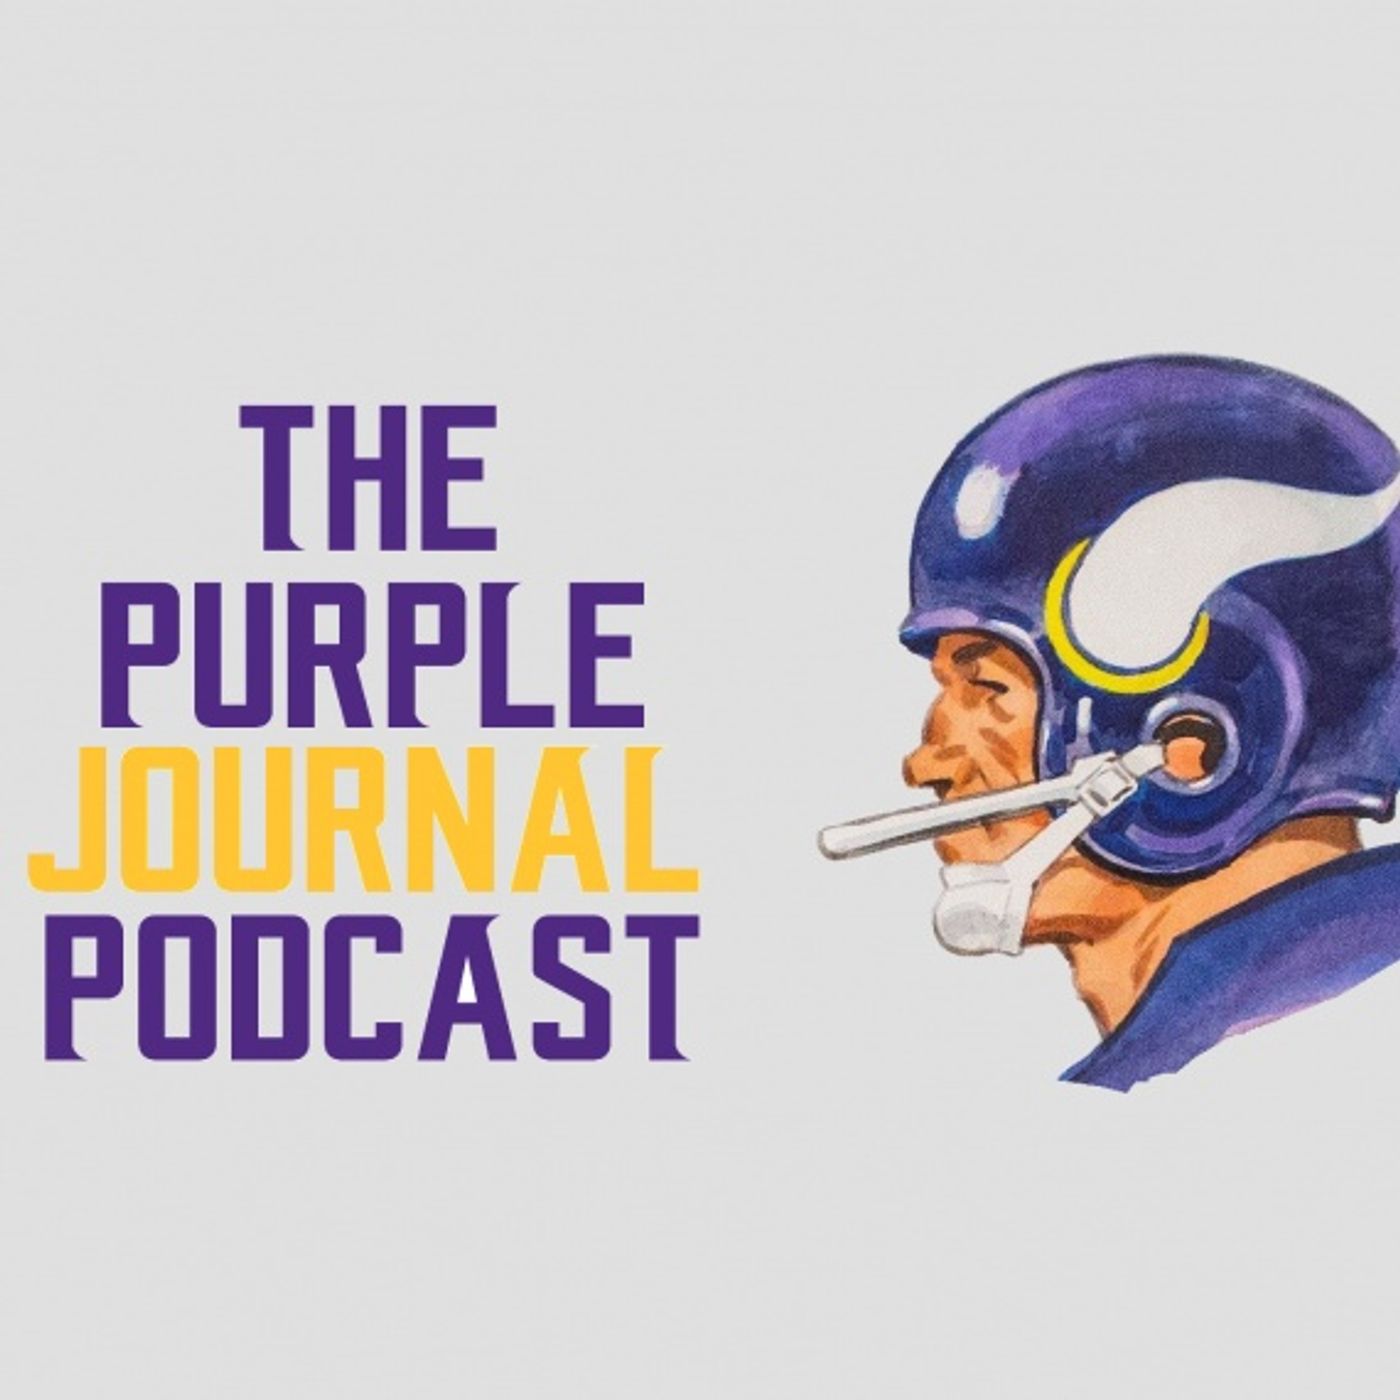 The purpleJOURNAL Podcast - Training Camp is FINALLY HERE and We're There Daily Edition